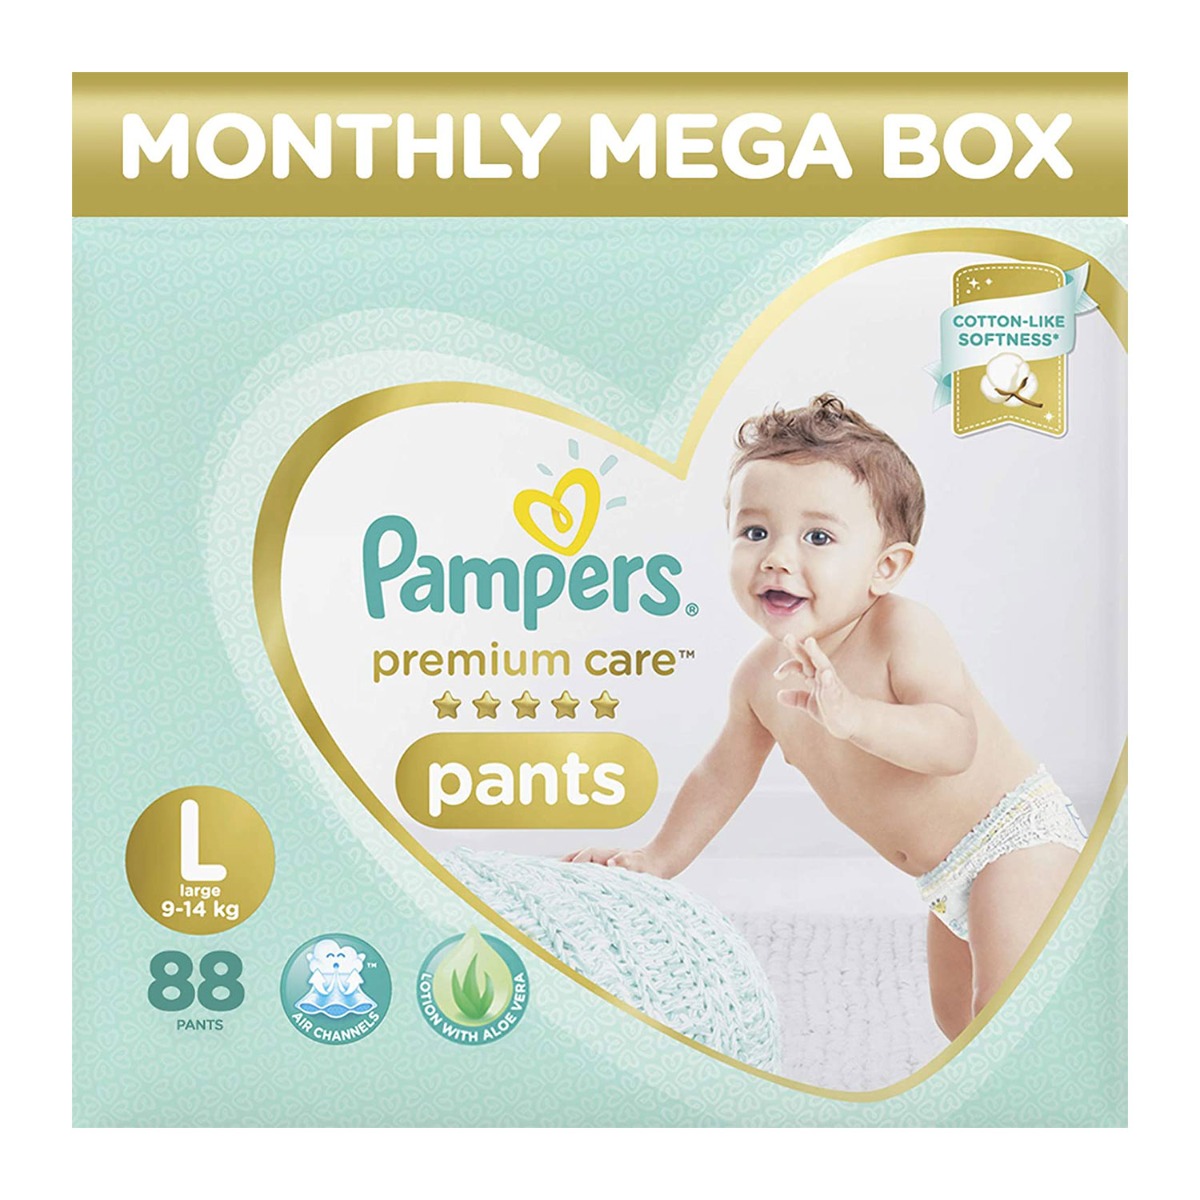 Pampers Premium Care Diaper Pants Monthly Box Pack - Large, 88 Pack